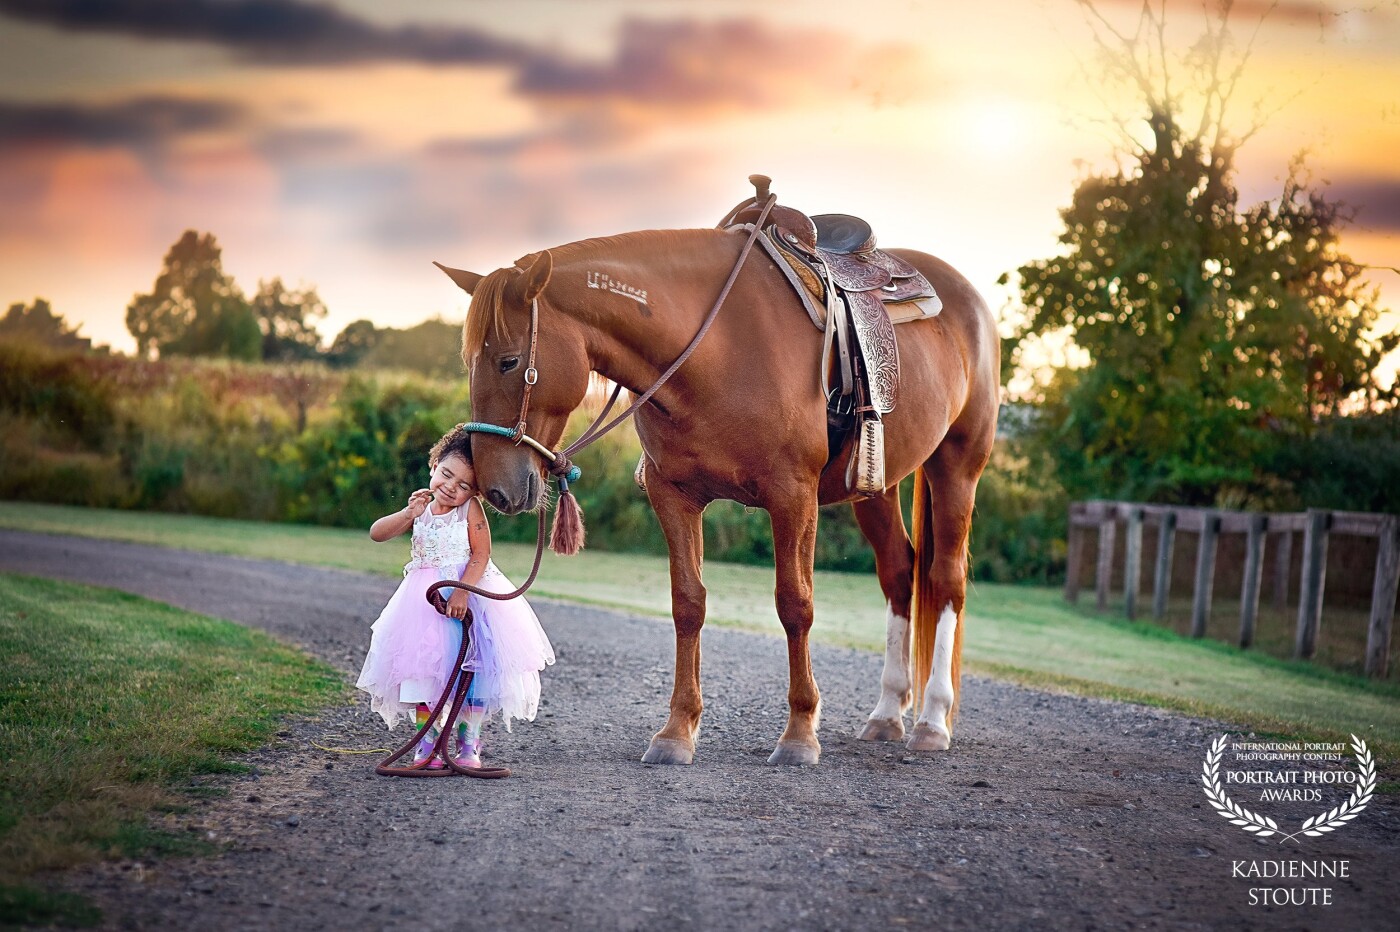 This is a portrait of my then 4 year old daughter and my 9 year old once wild mustang Argo at sunset at the barn where we keep her. This was shot with a Nikon Z6 and a Nikkor 700-200 f2.8 (at 200mm f2.8).